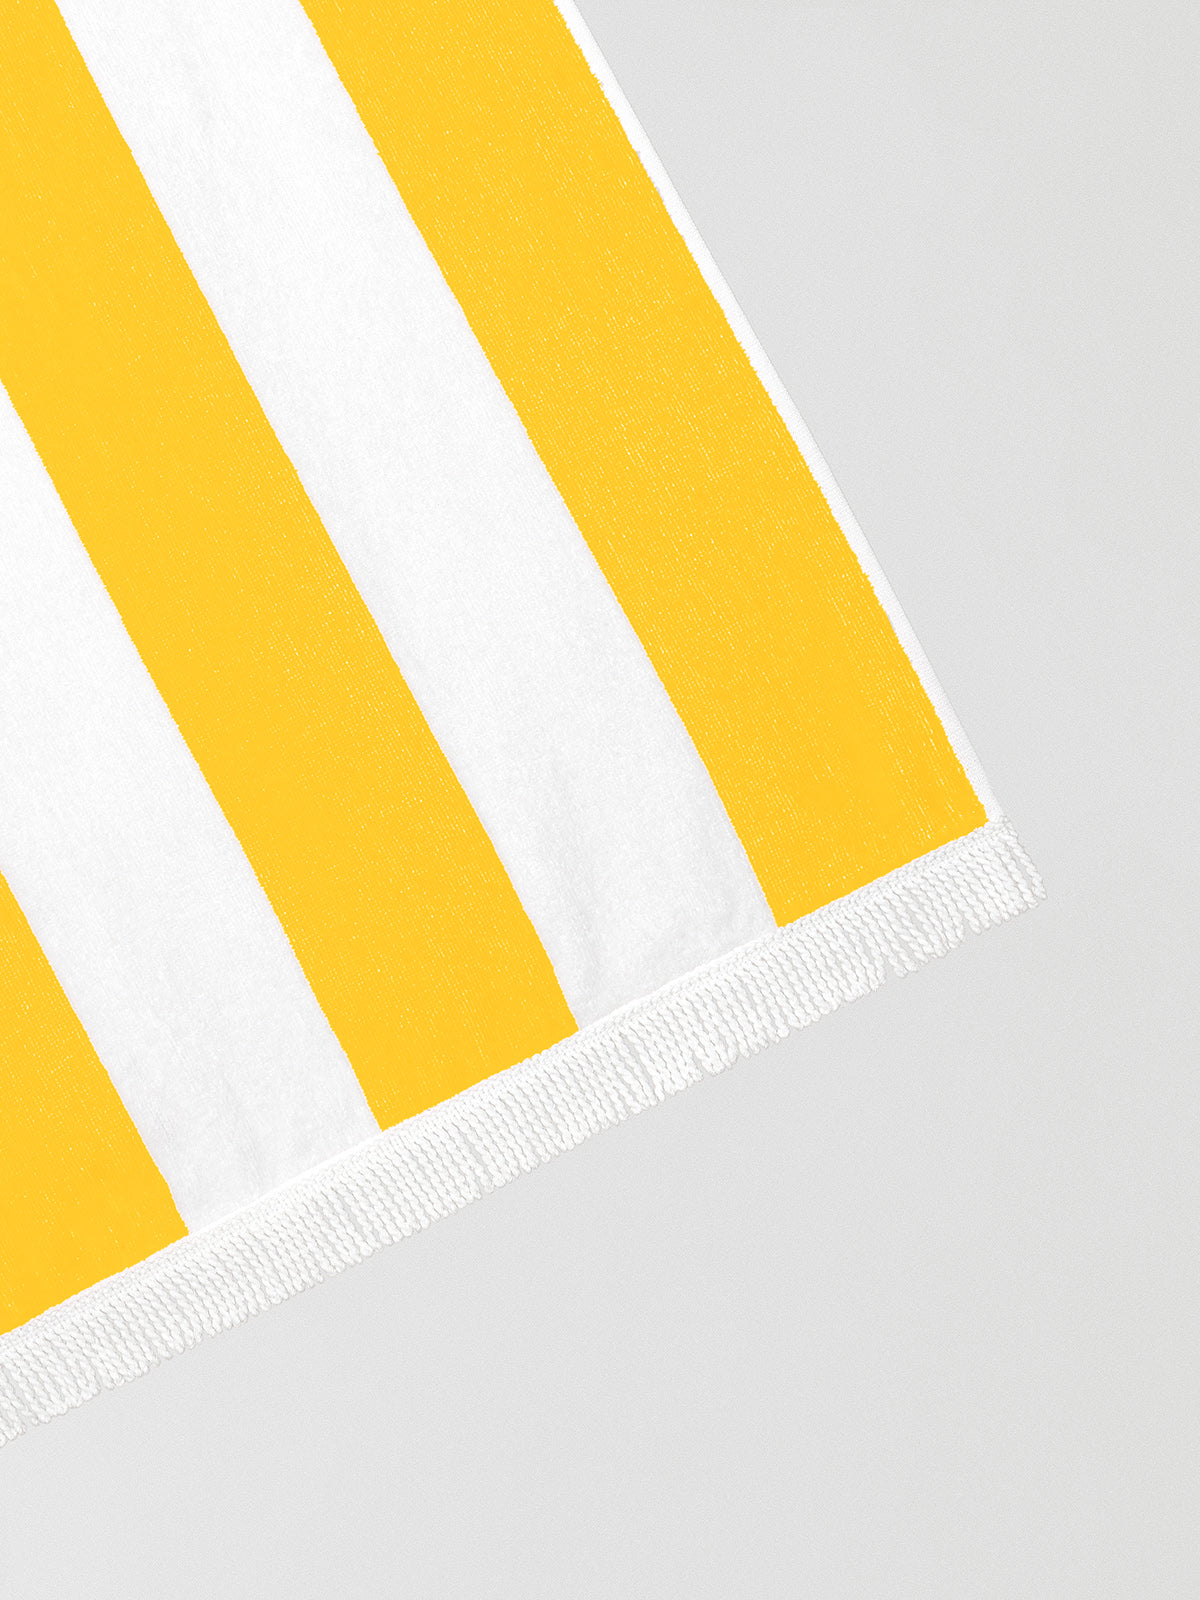 Yellow and white striped towel made of cotton. 